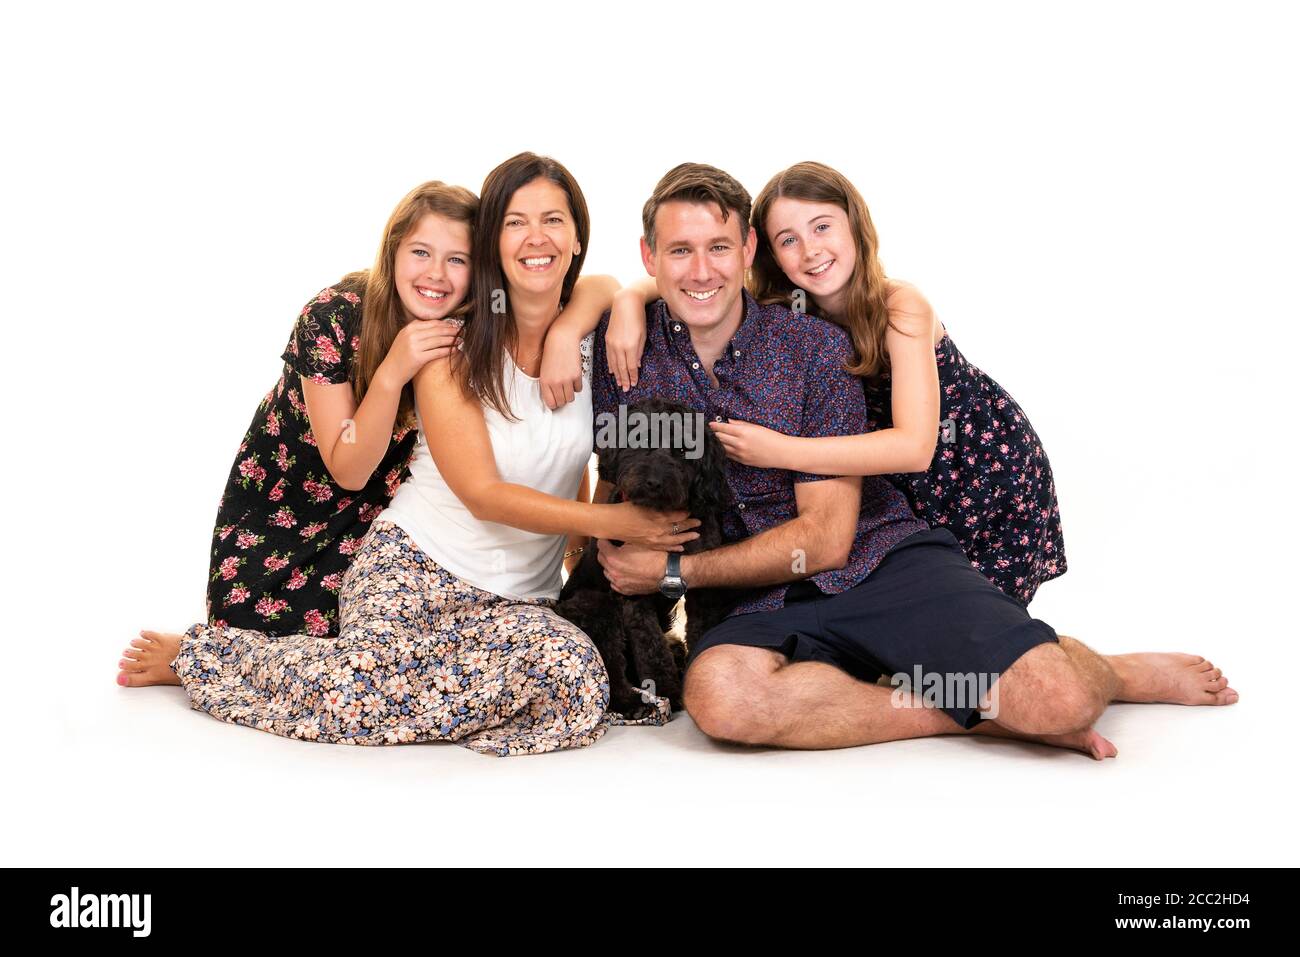 Horizontal portrait of a young family with their dog against a white background in a studio or high key. Stock Photo